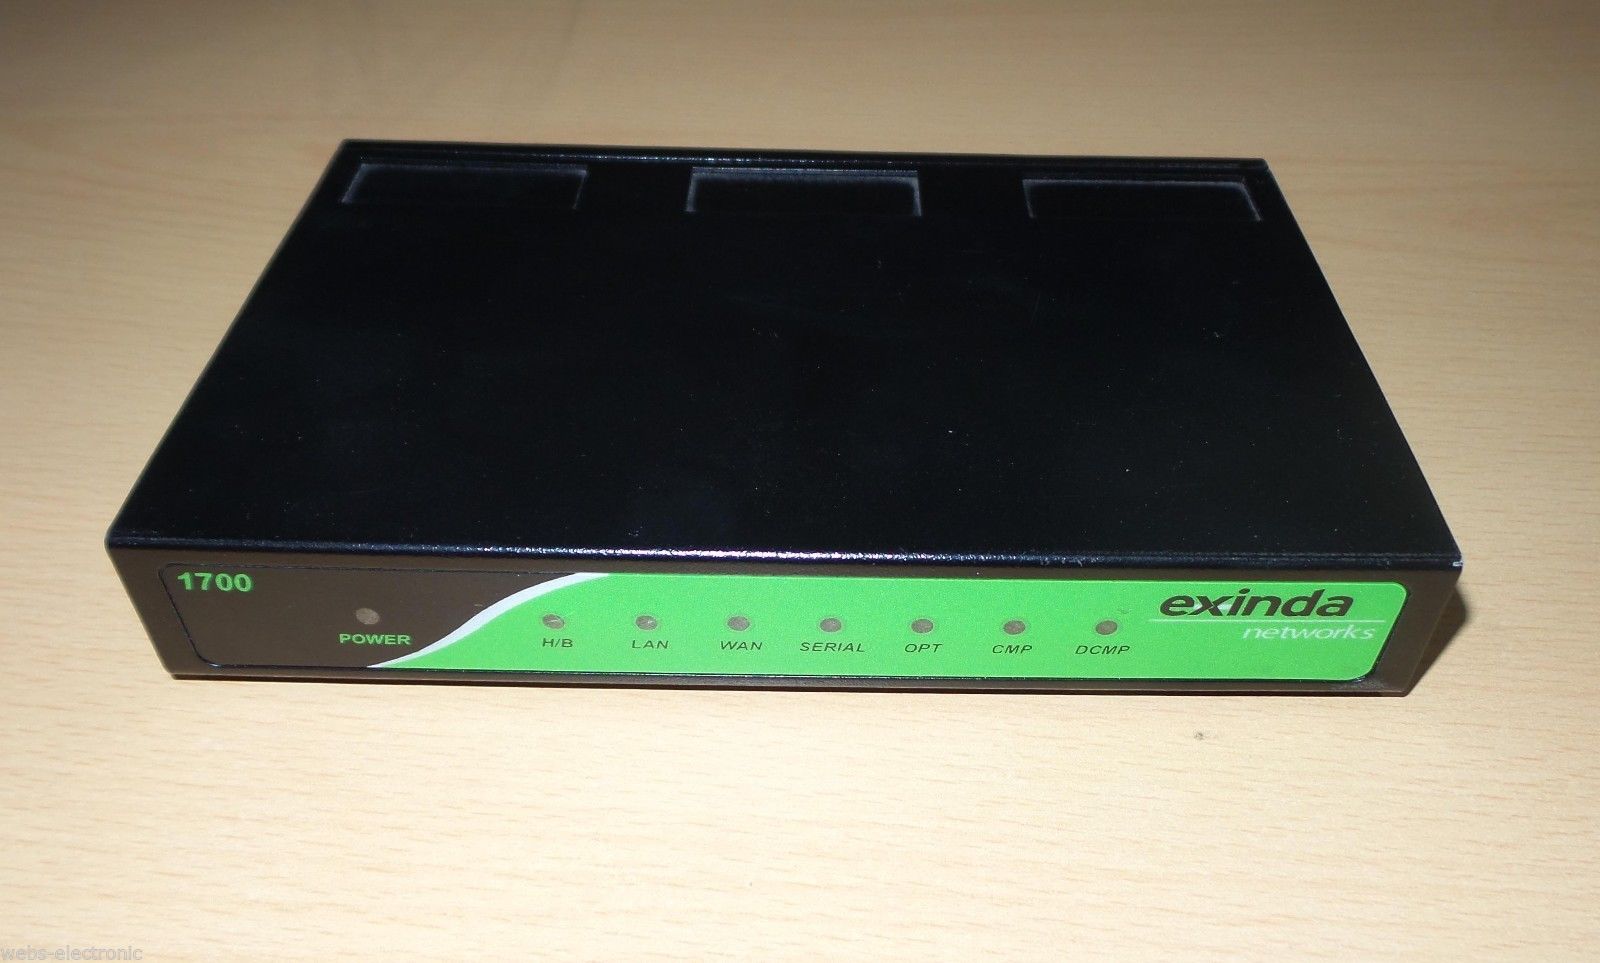 Exinda-1700-ex-1760-2-appliance-that-monitors-and-optimizes-up-to-2-mbps